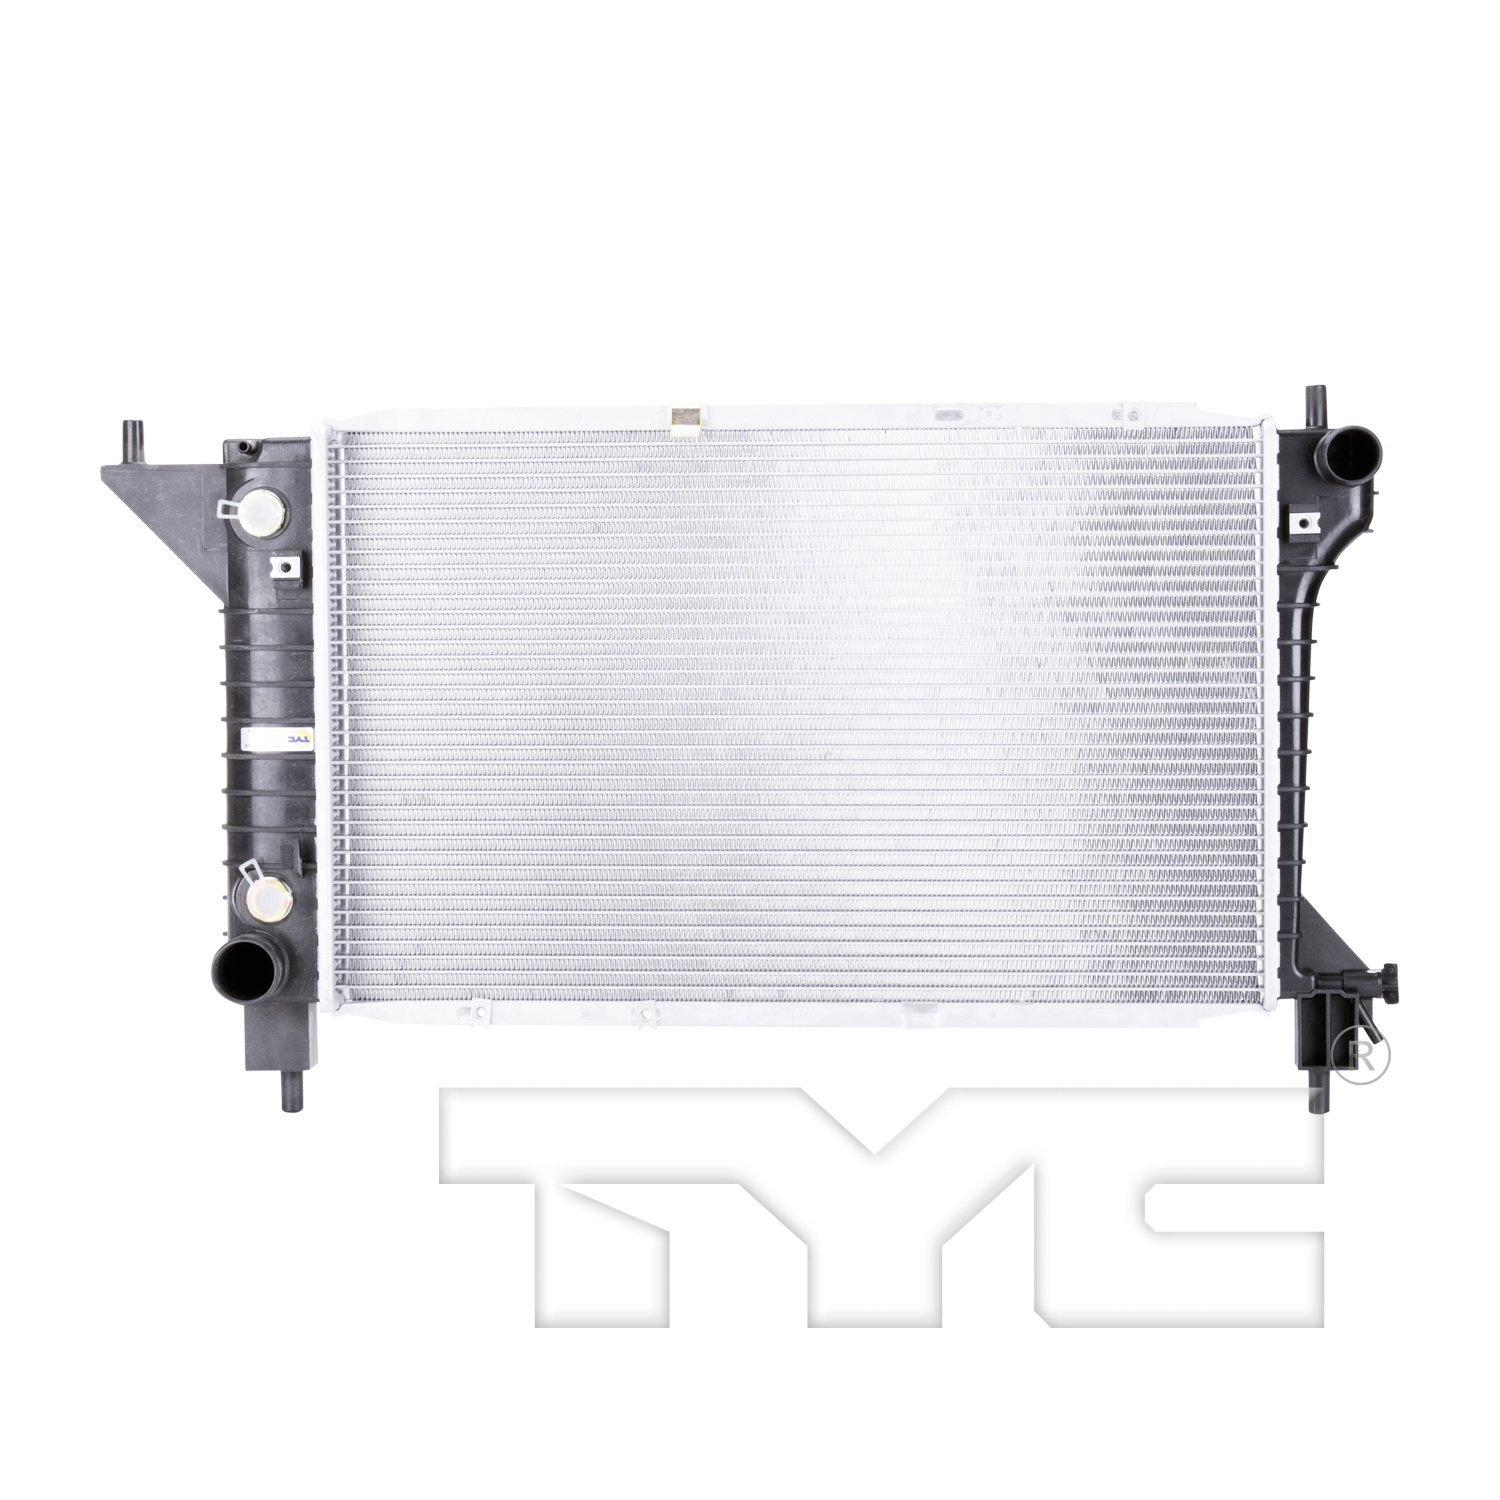 Aftermarket RADIATORS for FORD - MUSTANG, MUSTANG,96-96,Radiator assembly